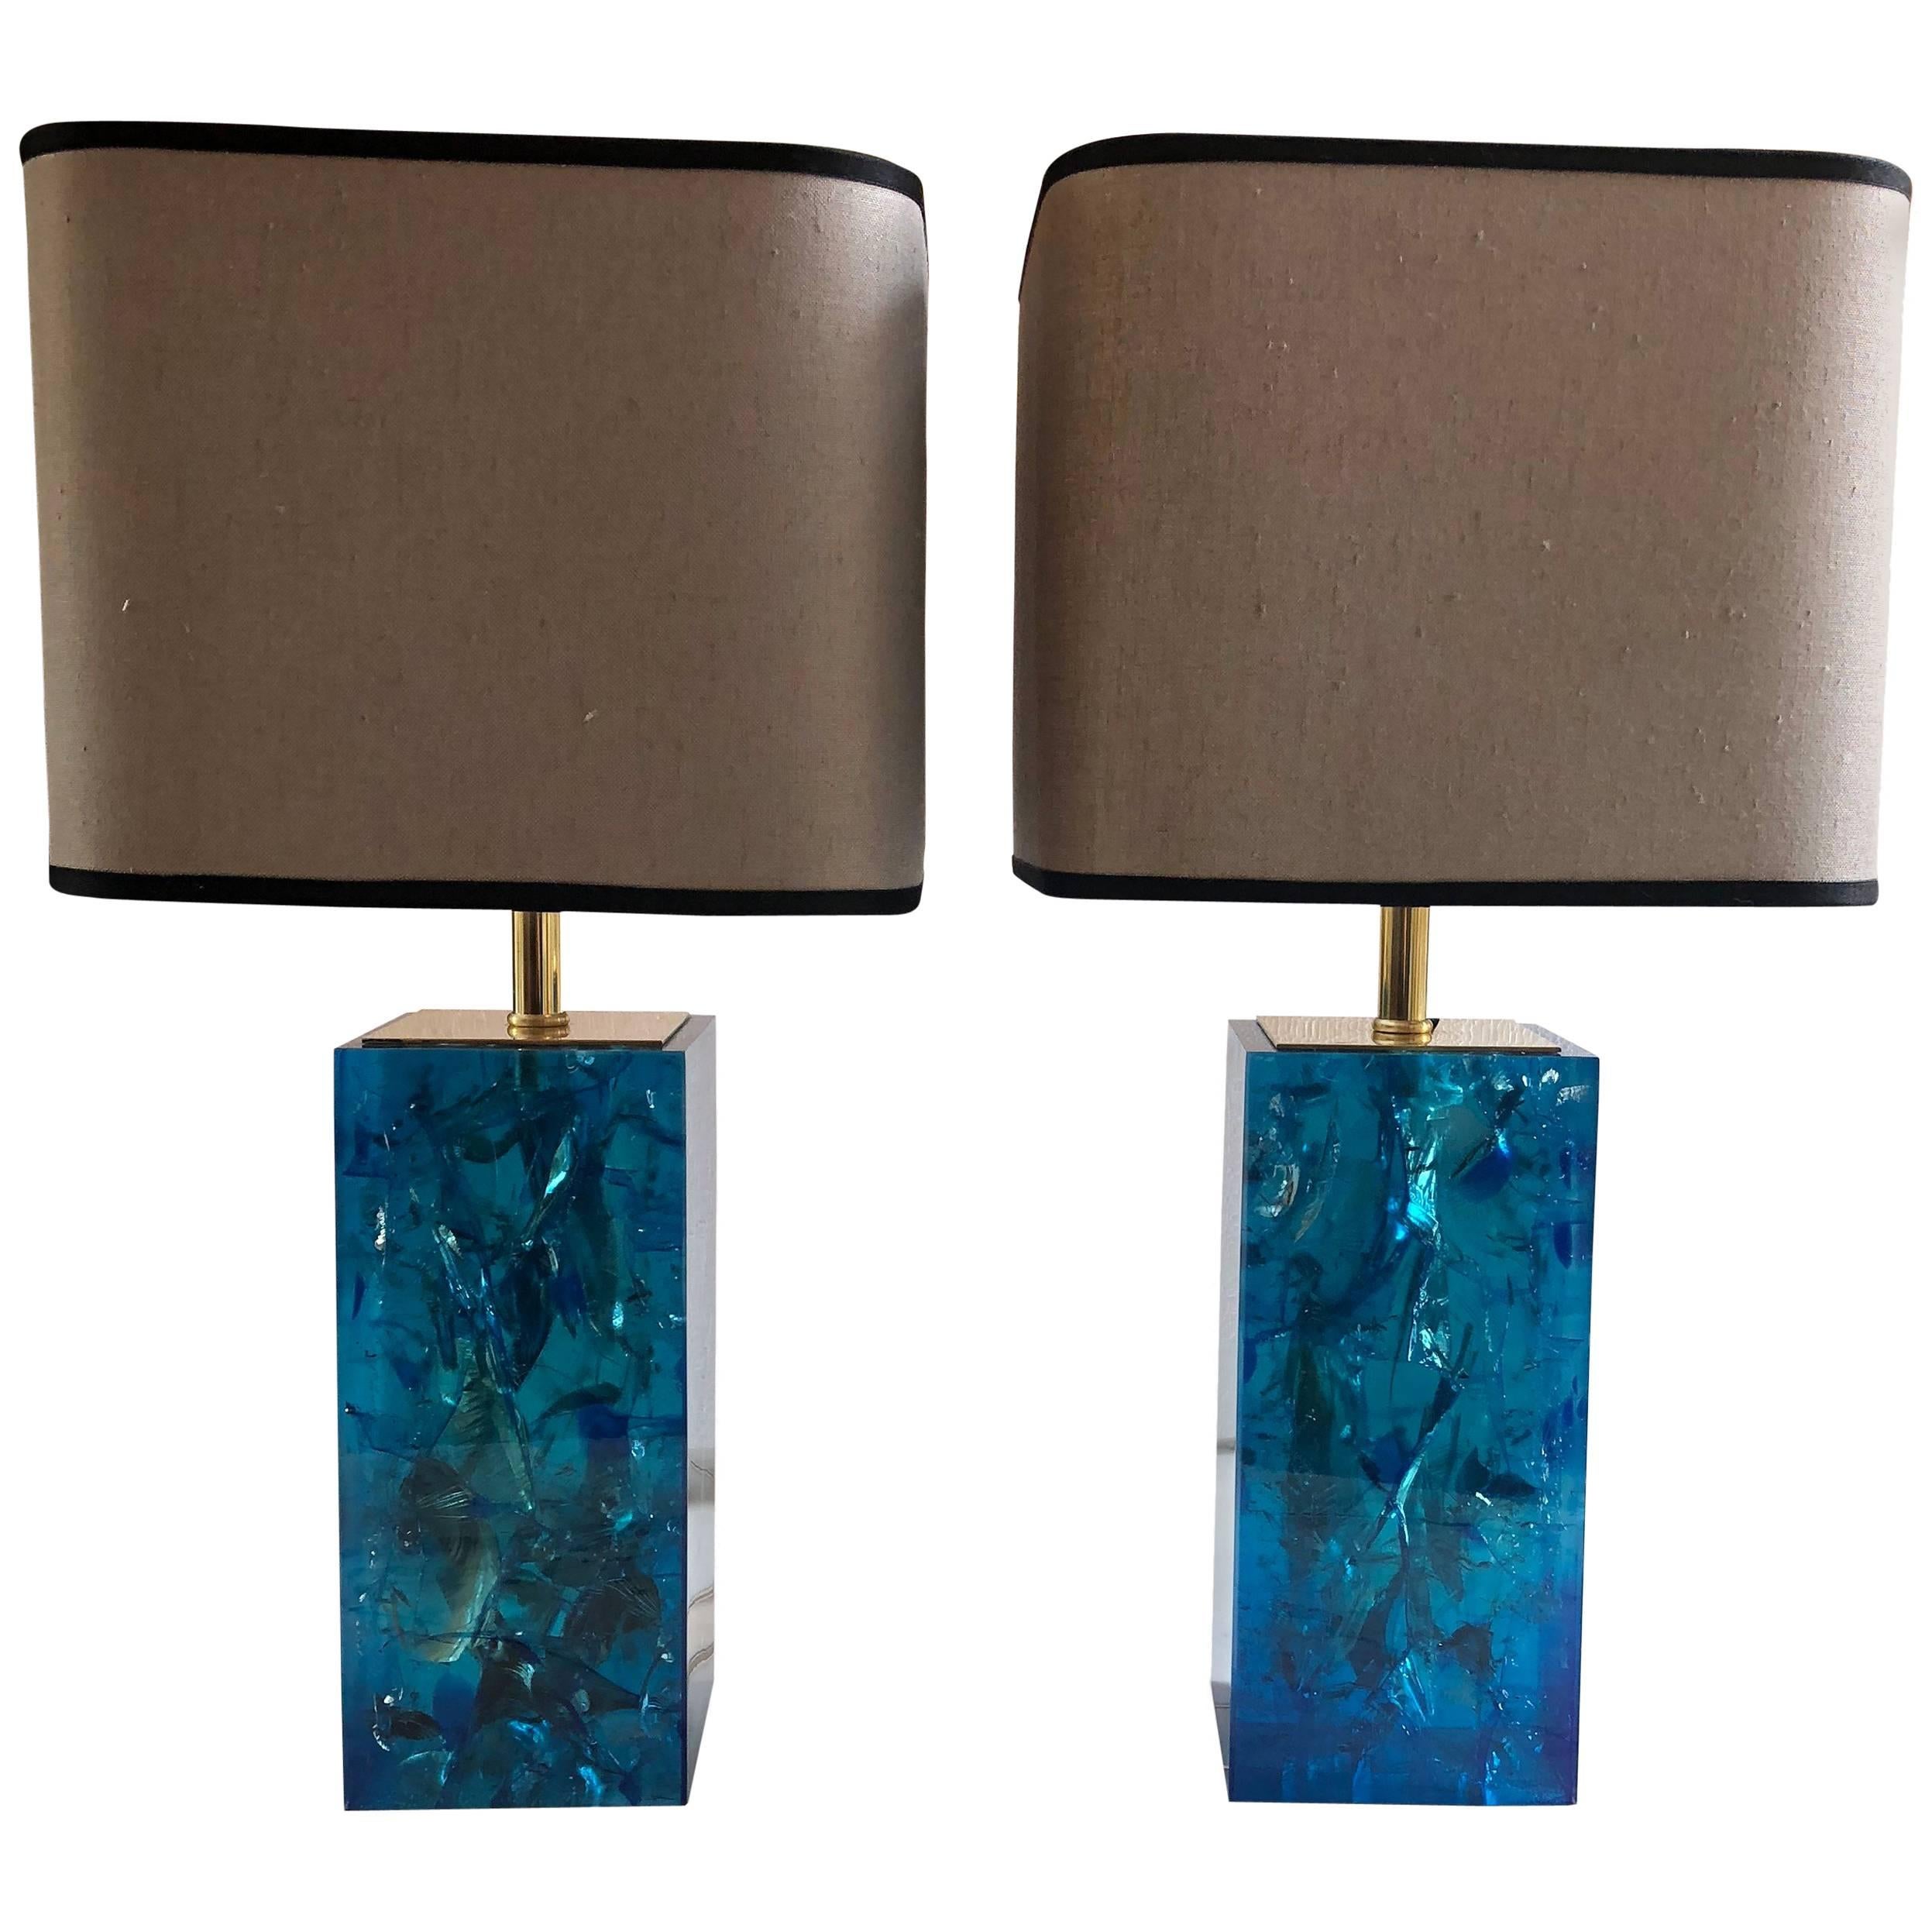 Late 20th Century Pair of Turquoise Blue Fractal Resin Table Lamps with Shades